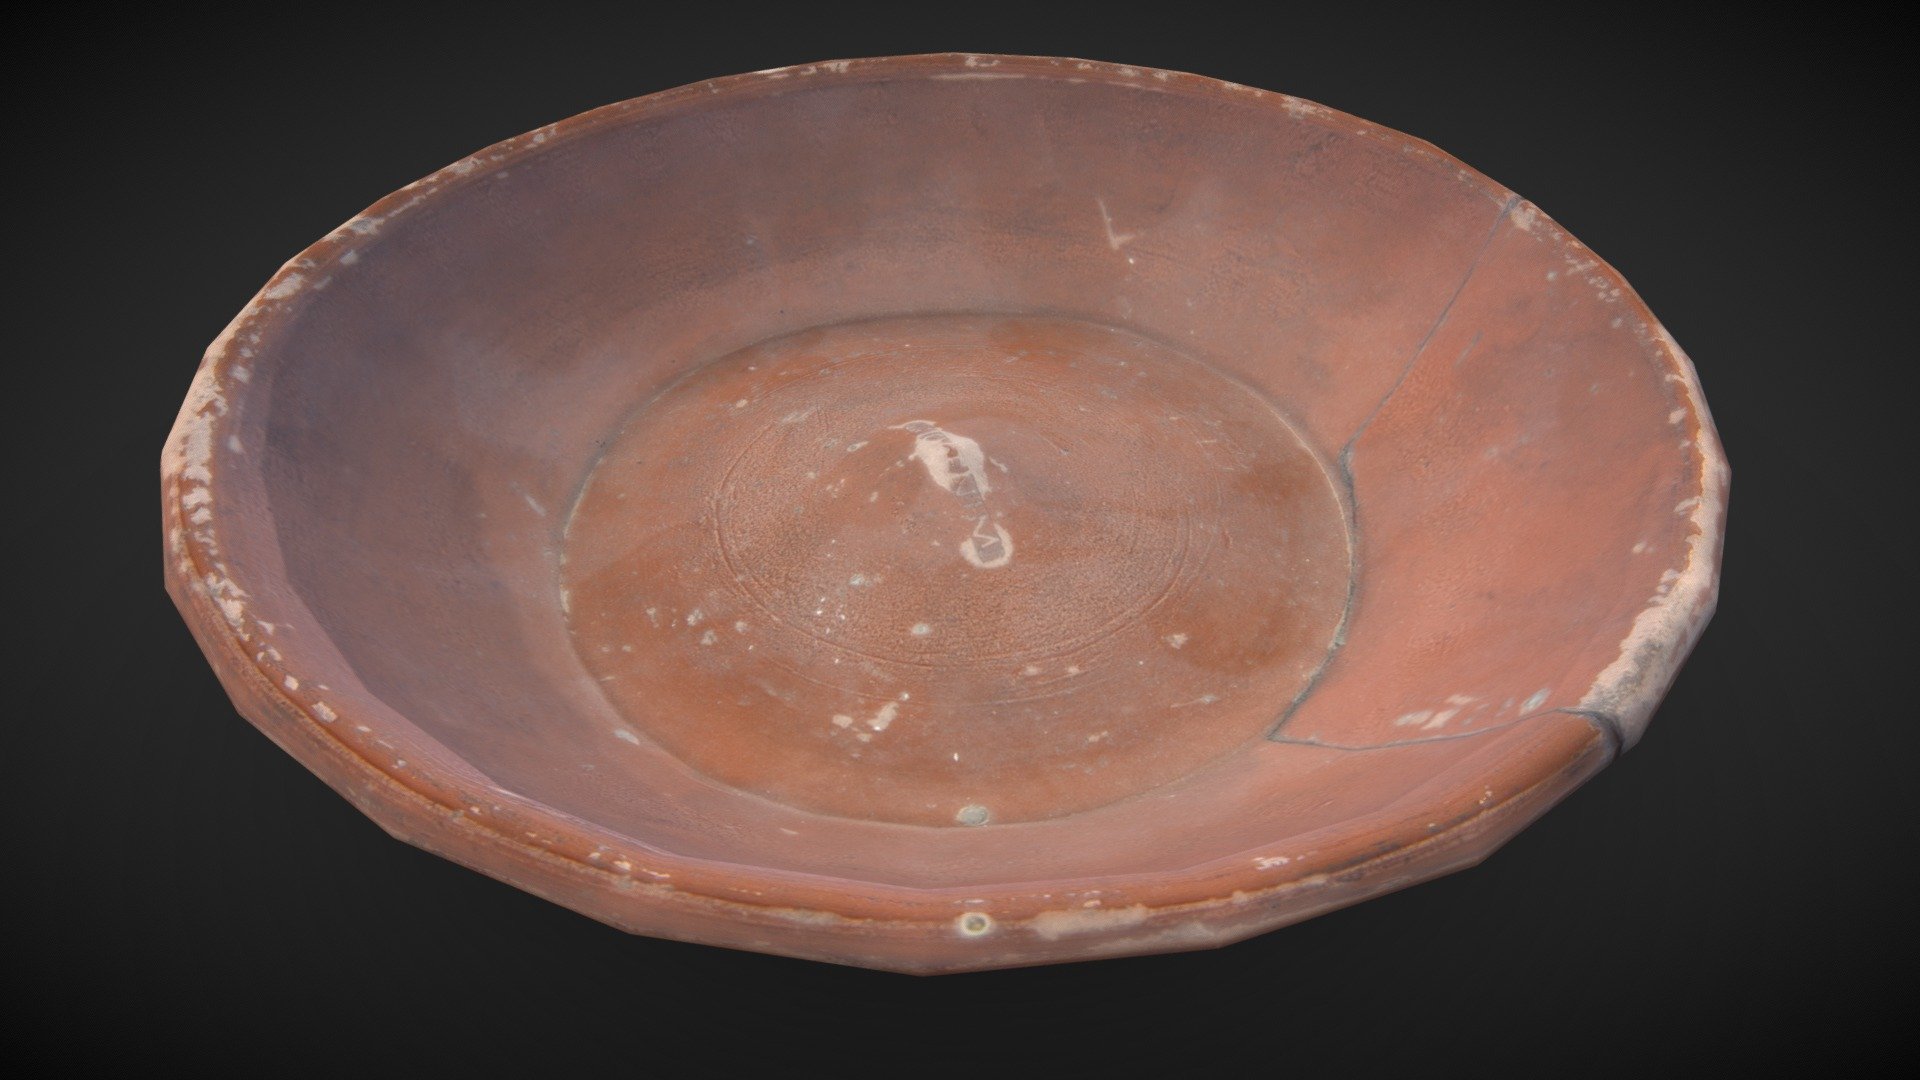 A Samian ware platter from Falkirk, possibly associated with Camelon fort. It is 5cm high and 18cm in diameter. It was made near Lezoux in France and the maker's mark ' RIIOGENIM &lsquo;, which translates as ‘Ritogenus’, is stamped on the inside of the base. 

Fine dishes such as these would have been used by the Roman officers and their families stationed in the forts along the Antonine Wall.

The Antonine Wall stretched right across Scotland, from the Clyde to the Forth. Constructed around 142 AD, and occupied for only 20 years, the remains of its ramparts, steep ditches, forts and bathhouses are still visible today. Since 2008, it has been part of the Frontiers of the Roman Empire World Heritage Site.

More information on the World Heritage Site is available on www.antoninewall.org

Reference: F.1912.1

Hunterian Museum, Glasgow - Samian ware platter, Falkirk, Antonine Wall - 3D model by Historic Environment Scotland (@HistoricEnvironmentScotland) 3d model